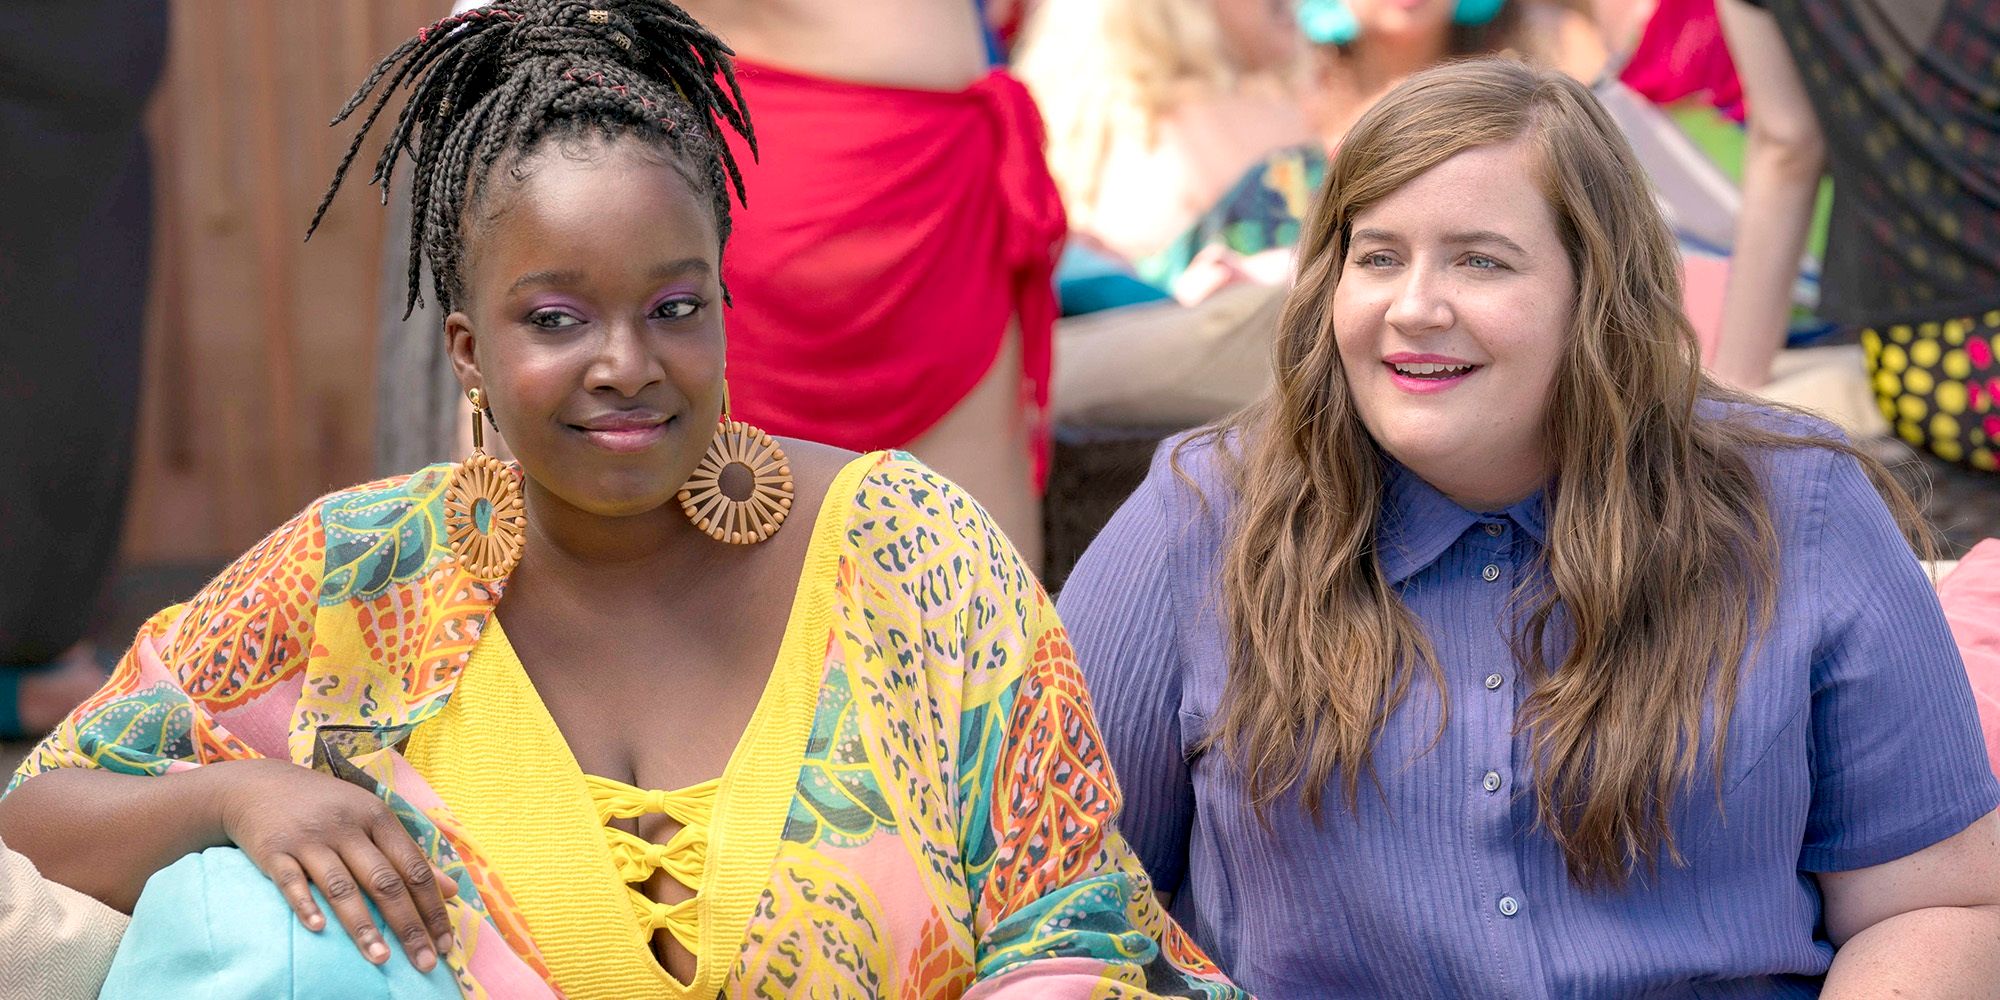 Fran (Lolly Adefope) and Annie Easton (Aidy Bryant) sitting together at a pool party in Shrill